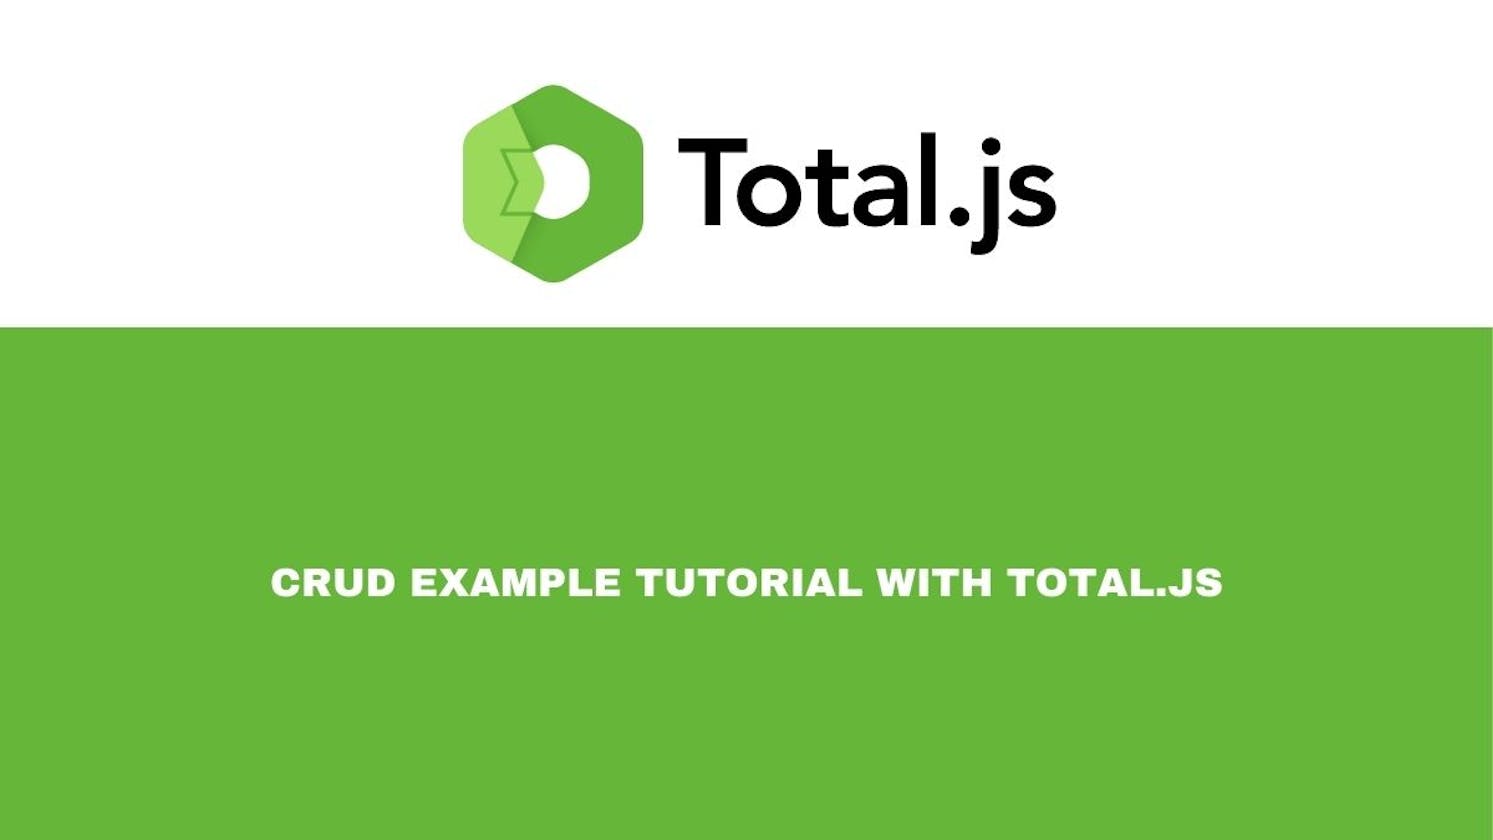 Blog post tutorial with total.js (part 3 end)